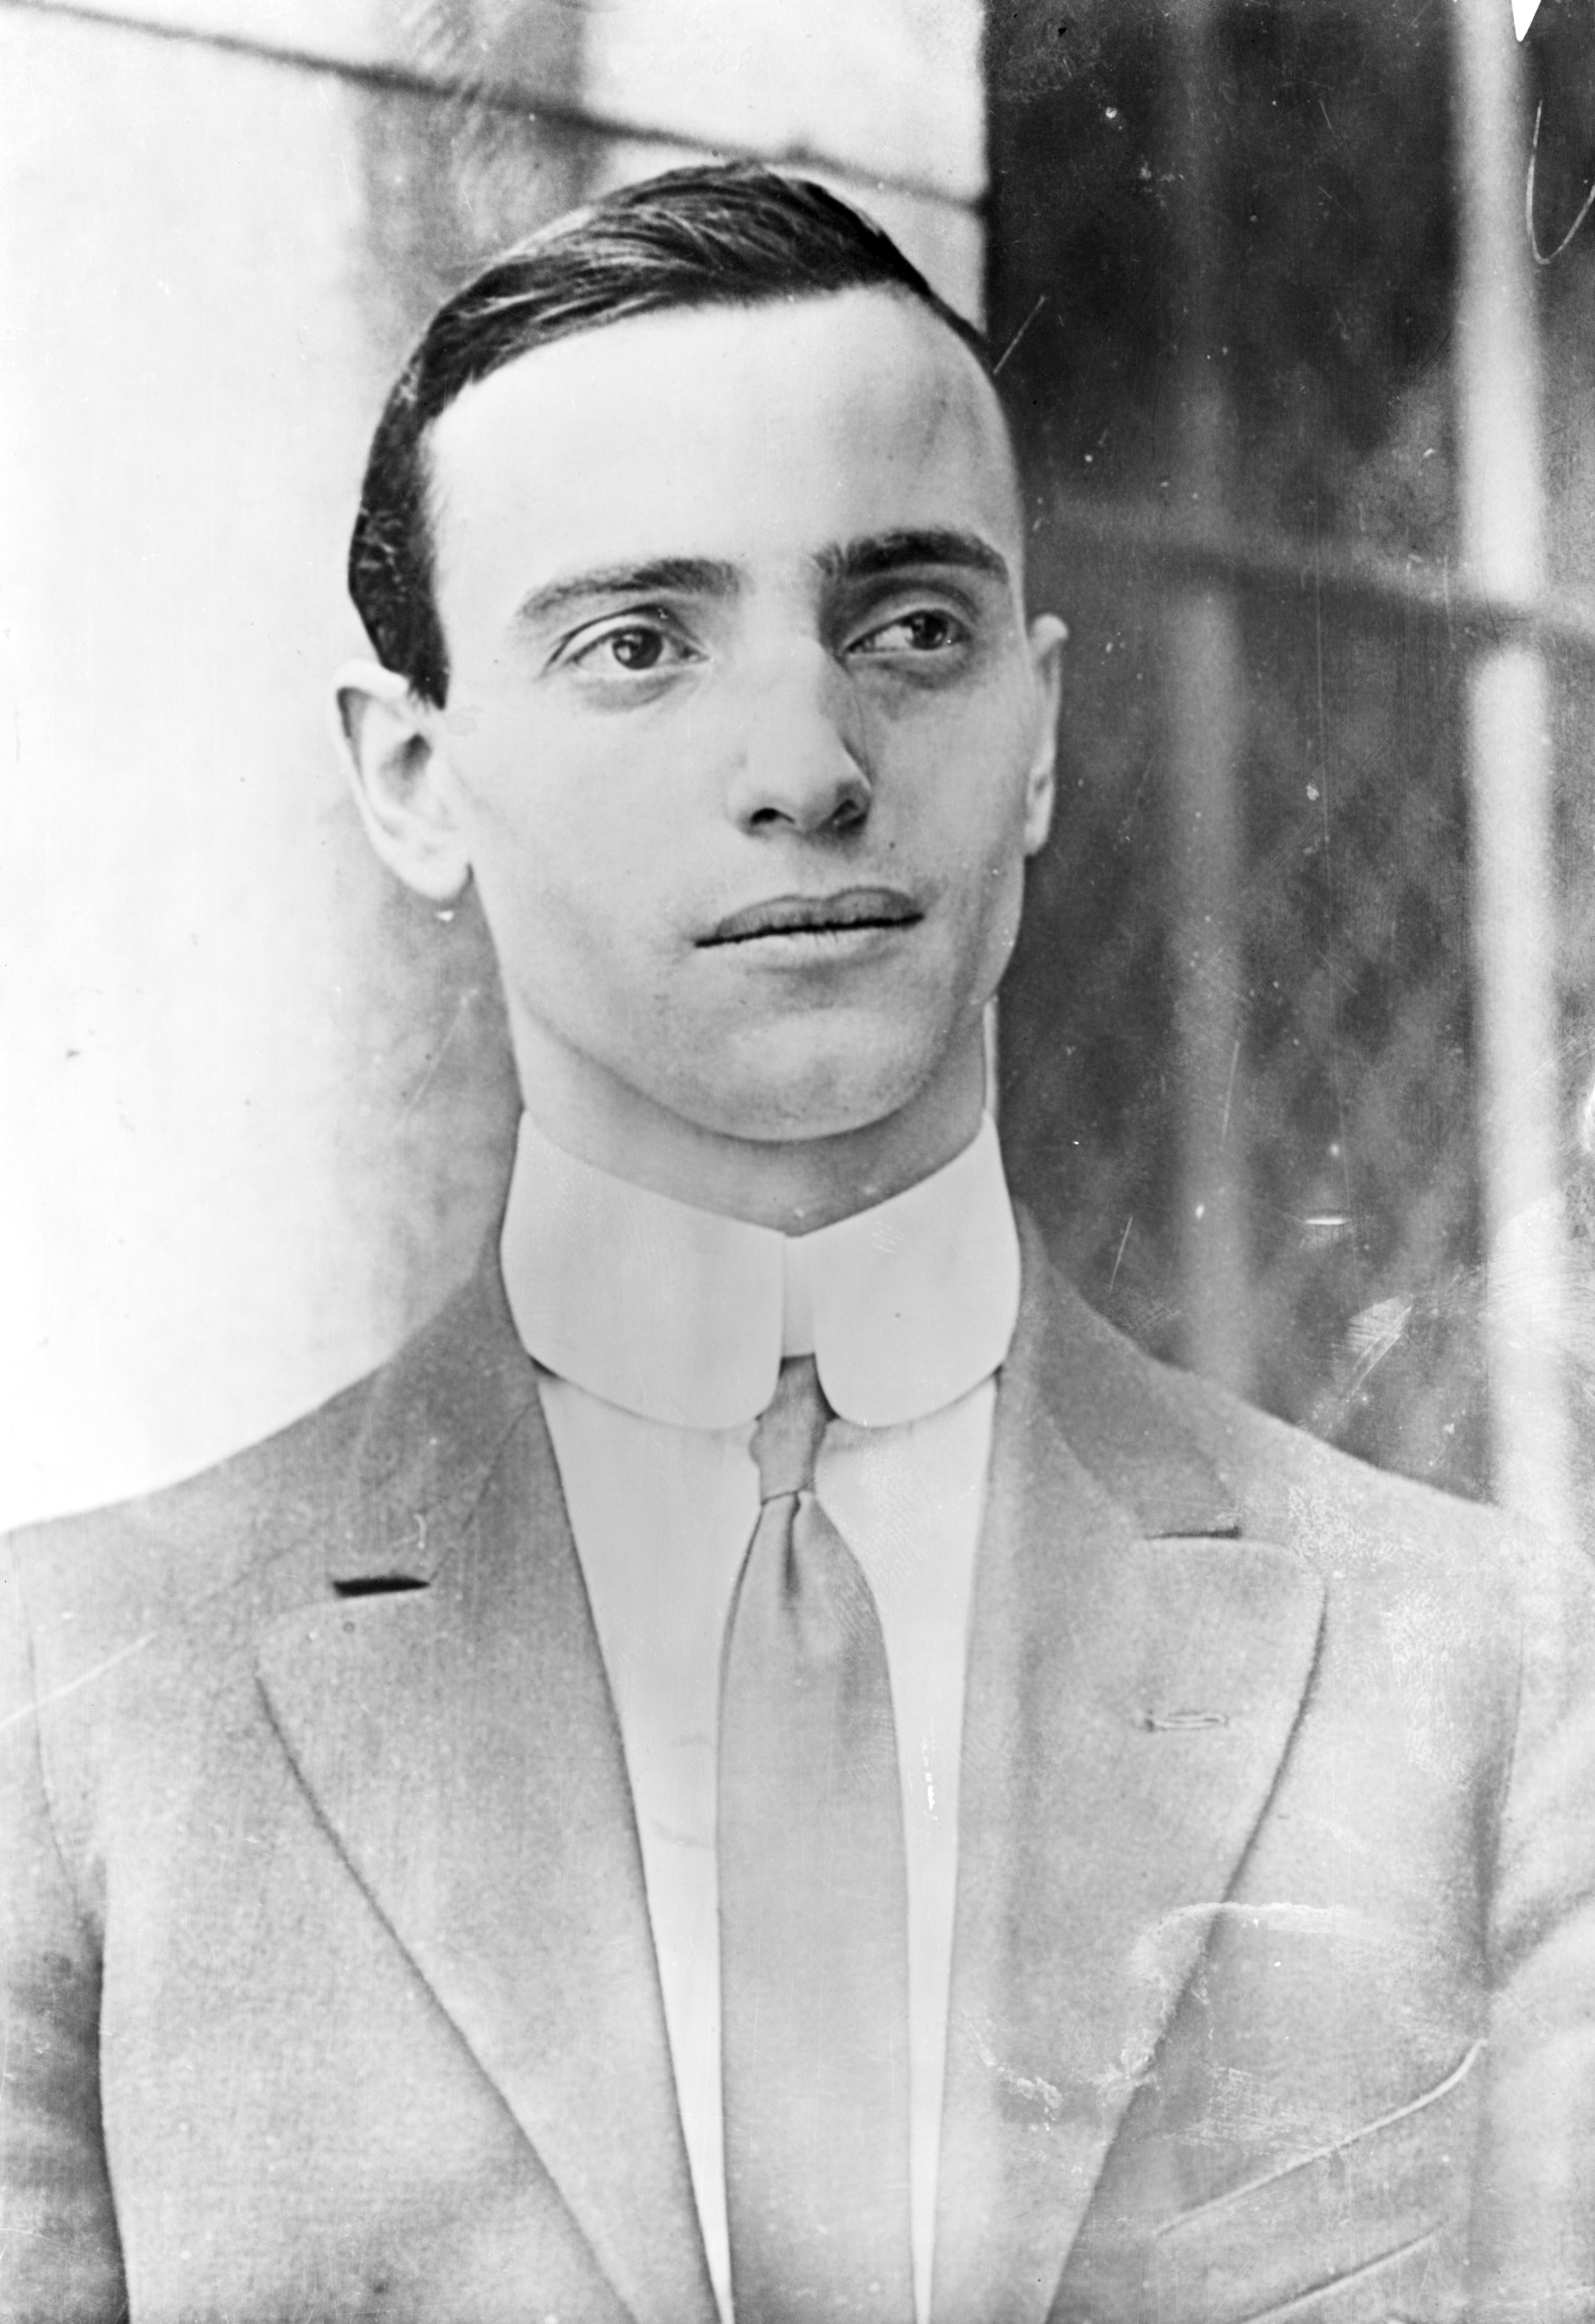 Leo Frank, who was lynched by a mob in 1915. (Bettmann Archive/Getty Images)